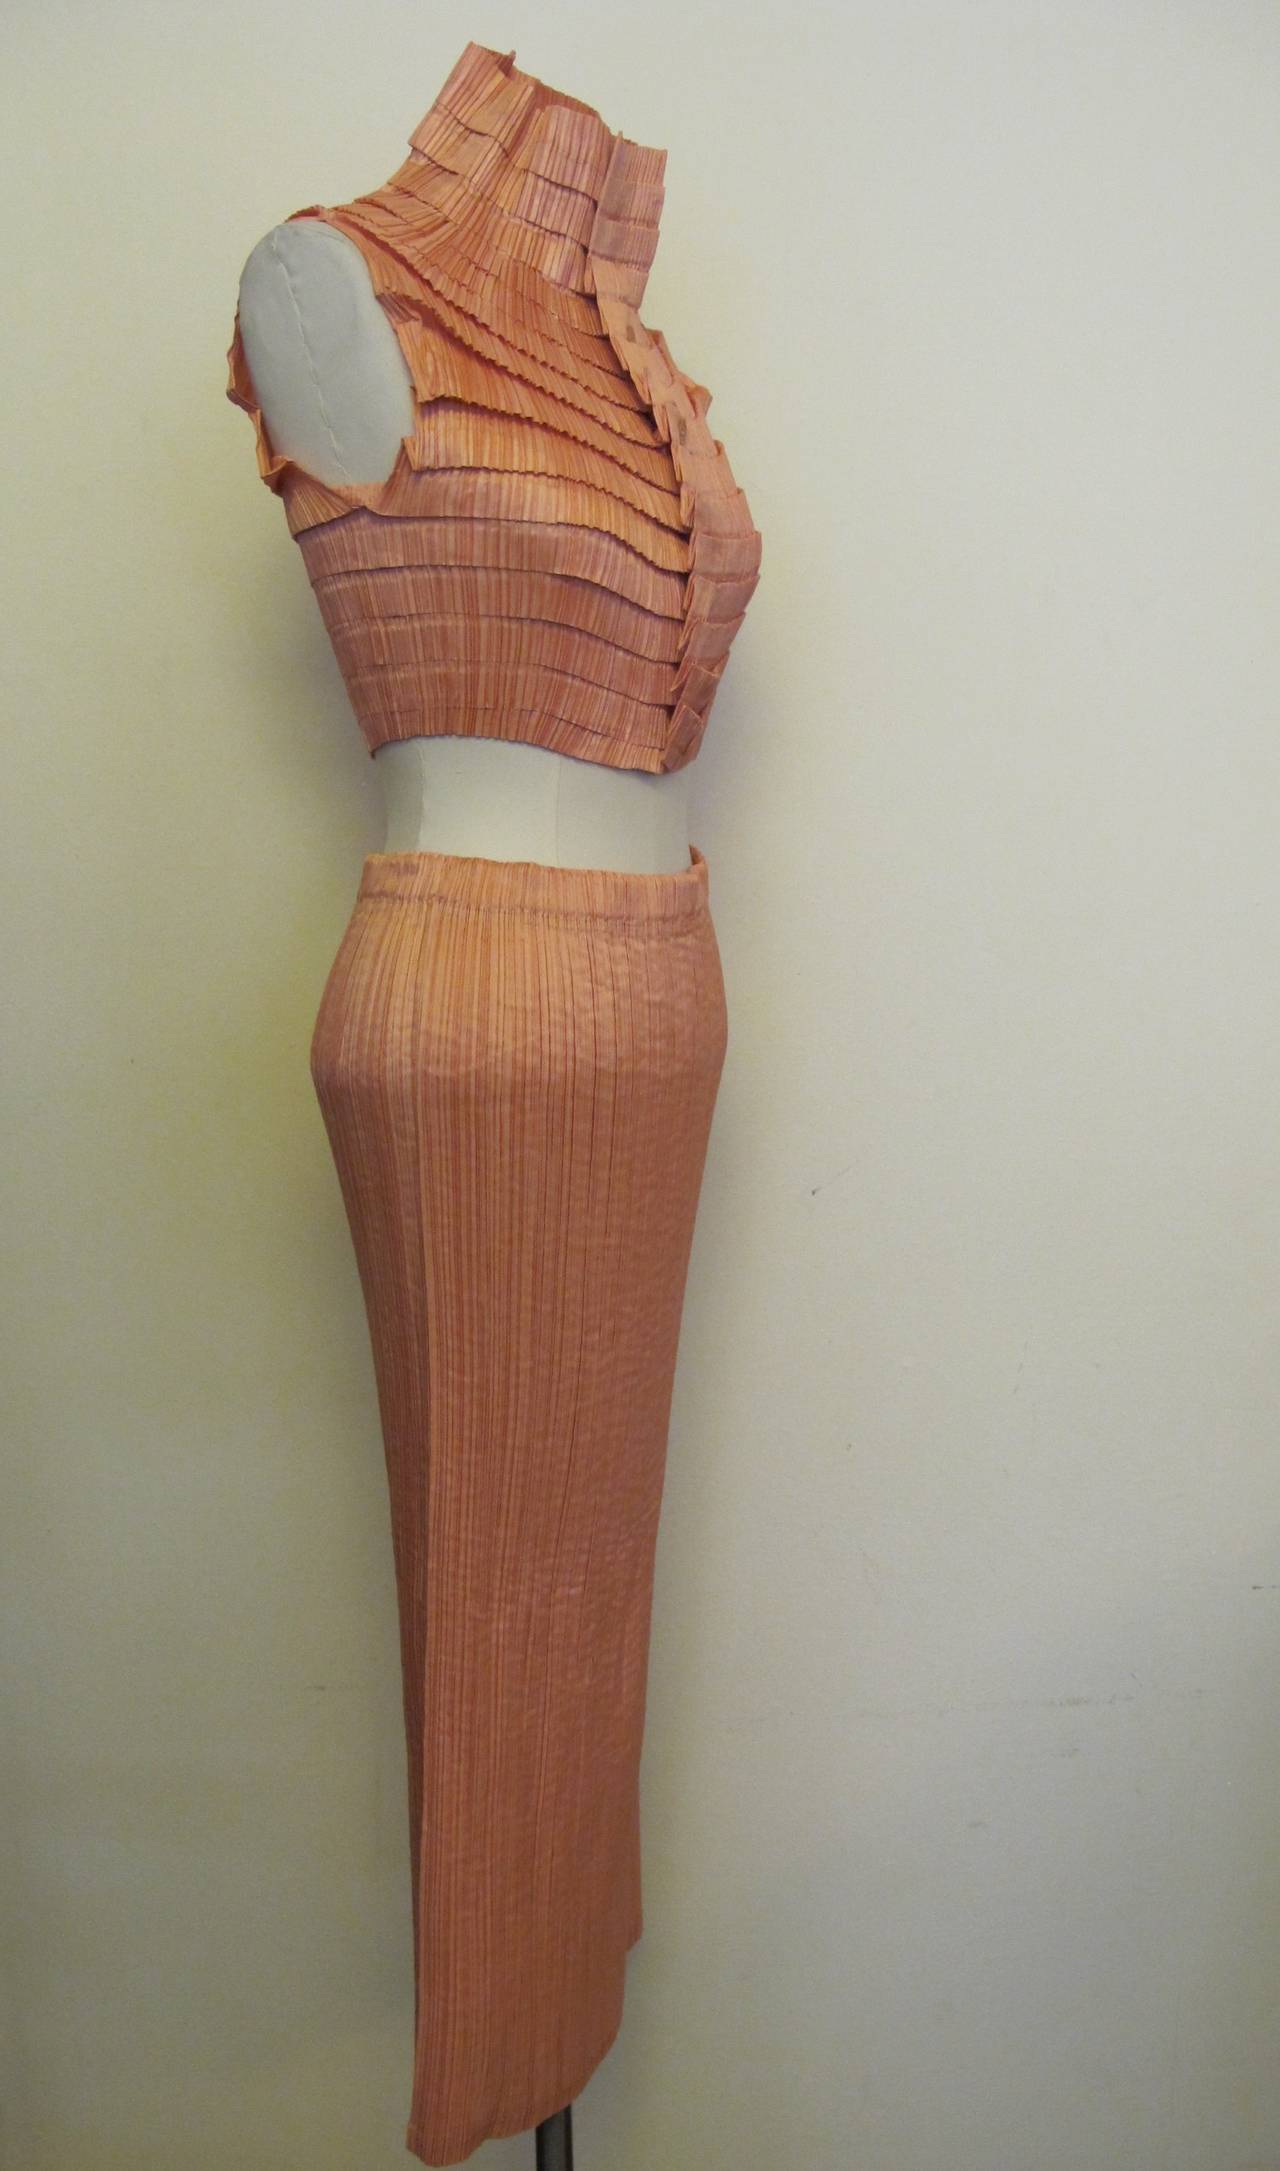 Iconic, lush Issey Miyake light Salmon Blouse and Skirt with great deal of stretch.

Blouse: Shoulder to shoulder measures 12.5 inches. Blouse length measures 17 inches long.

Skirt: Waist measures 26 inches (stretch fabric). Skirt length